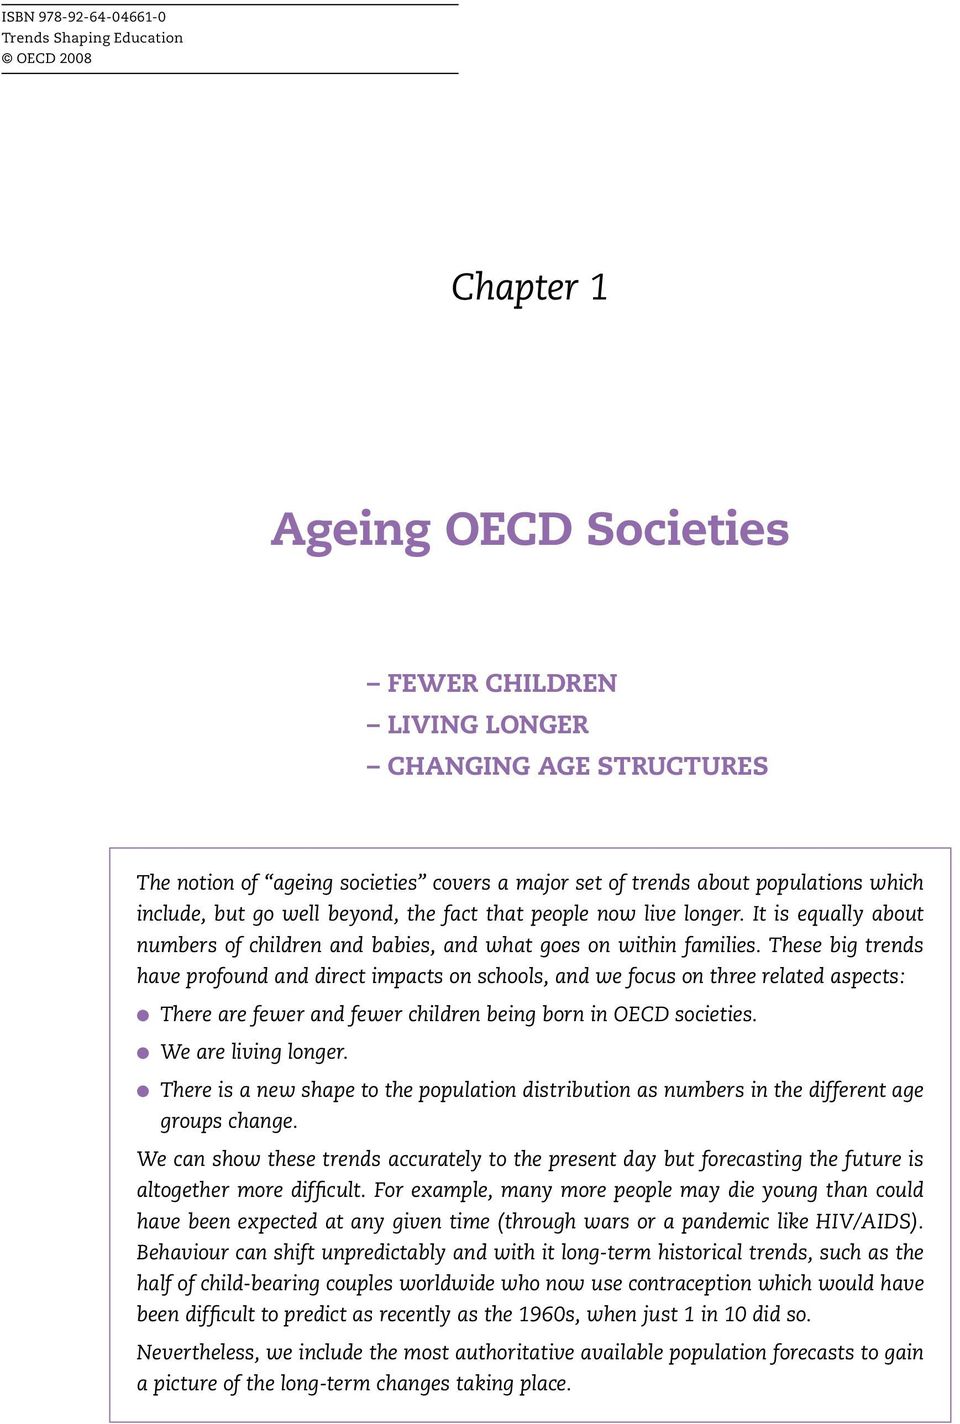 These big trends have profound and direct impacts on schools, and we focus on three related aspects: There are fewer and fewer children being born in OECD societies. We are living longer.